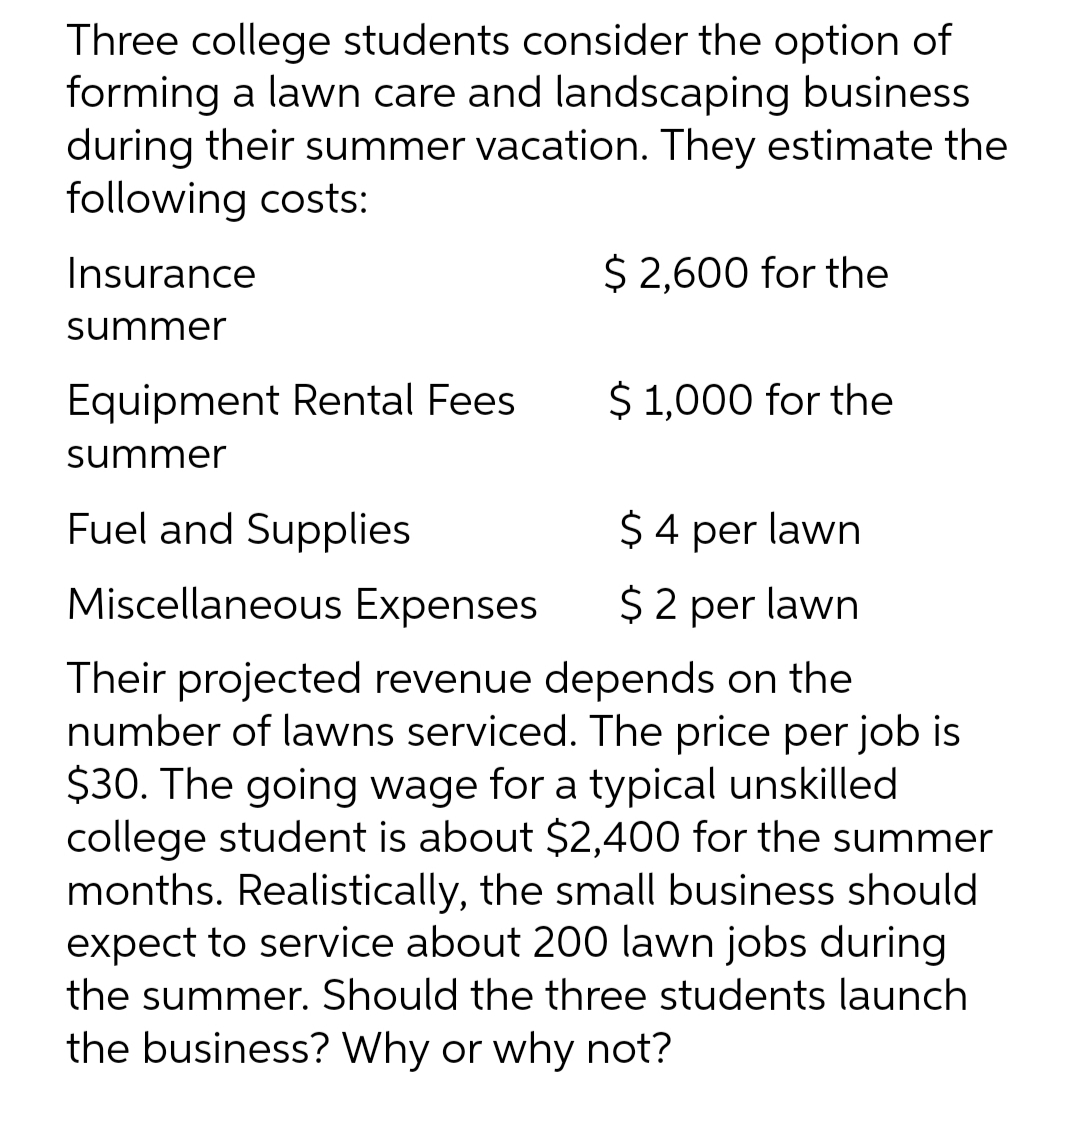 Three college students consider the option of
forming a lawn care and landscaping business
during their summer vacation. They estimate the
following costs:
Insurance
$ 2,600 for the
summer
Equipment Rental Fees
$1,000 for the
summer
Fuel and Supplies
$ 4 per lawn
Miscellaneous Expenses $2 per lawn
Their projected revenue depends on the
number of lawns serviced. The price per job is
$30. The going wage for a typical unskilled
college student is about $2,400 for the summer
months. Realistically, the small business should
expect to service about 200 lawn jobs during
the summer. Should the three students launch
the business? Why or why not?